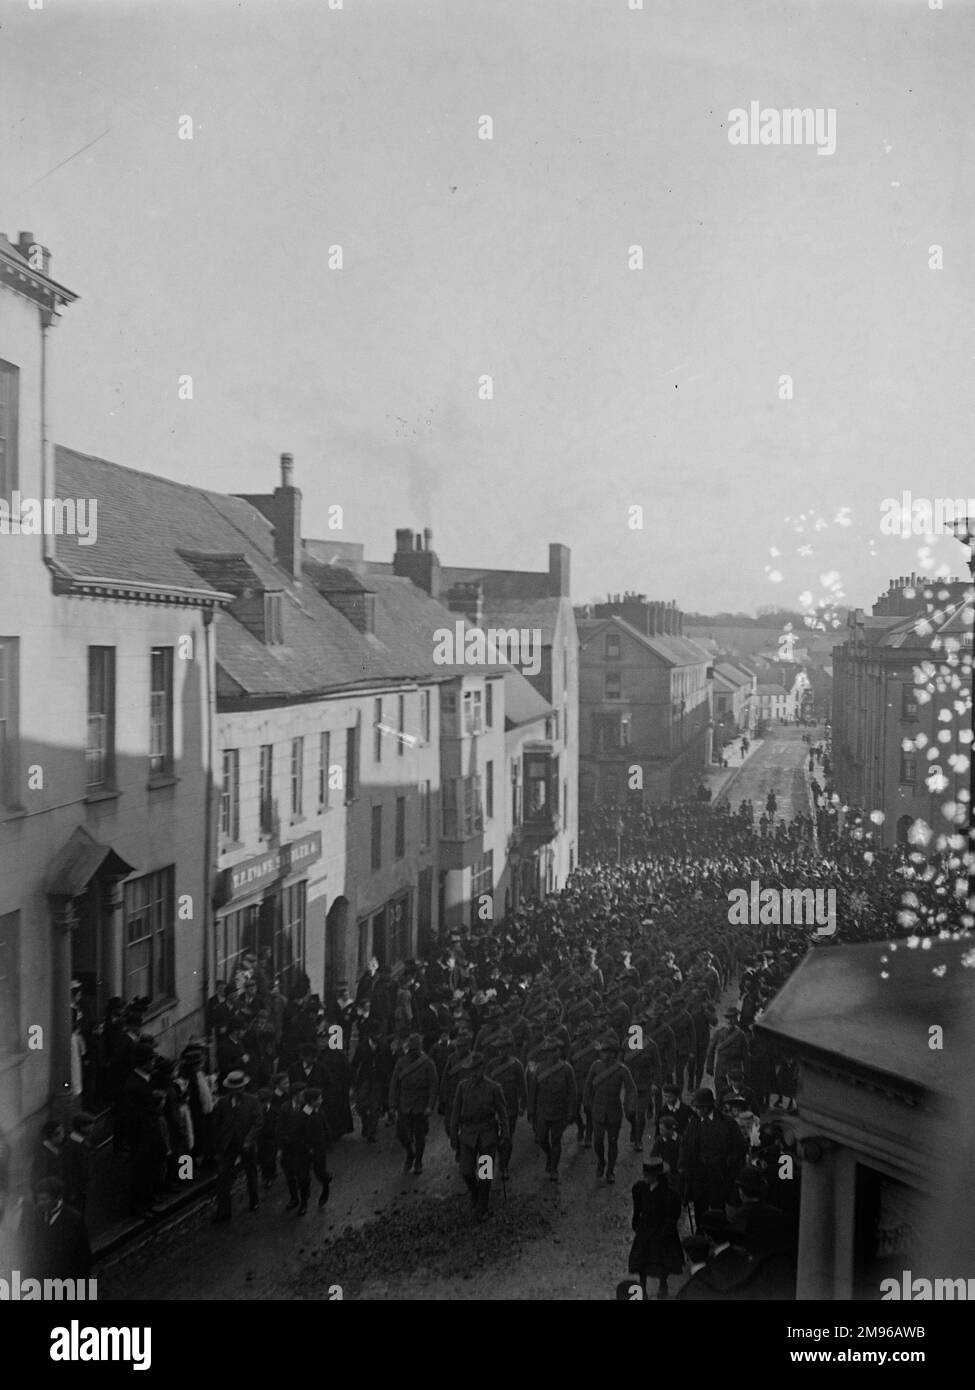 Soldiers marching up the High Street in Haverfordwest, Pembrokeshire, Dyfed, South Wales, watched by various townspeople, around the time of the outbreak of the First World War. Stock Photo